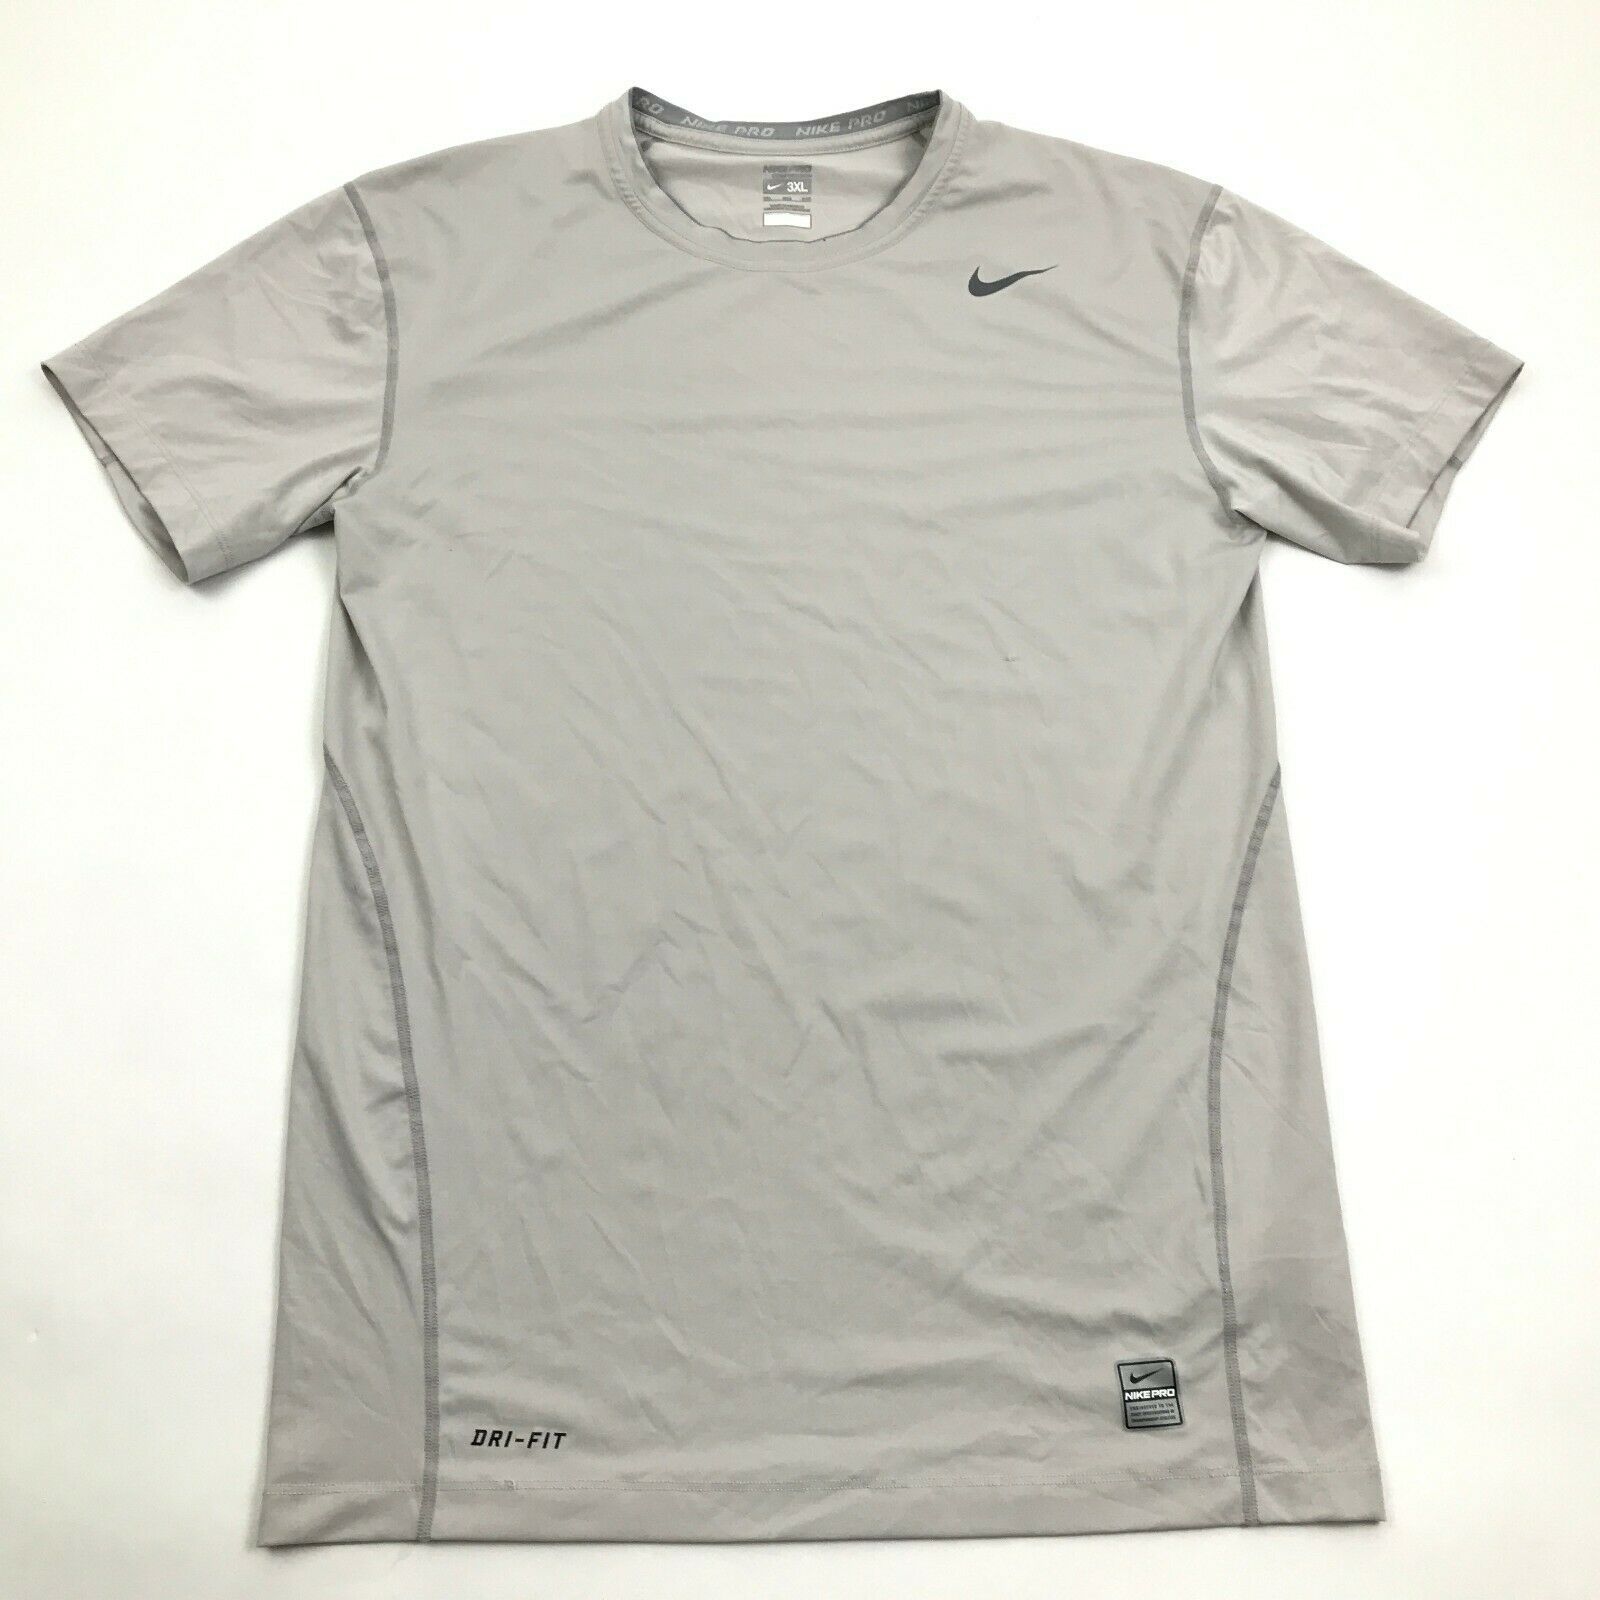 NIKE PRO Compression Shirt Men's Size 3XL XXXL Fitted Training Grey Tee ...